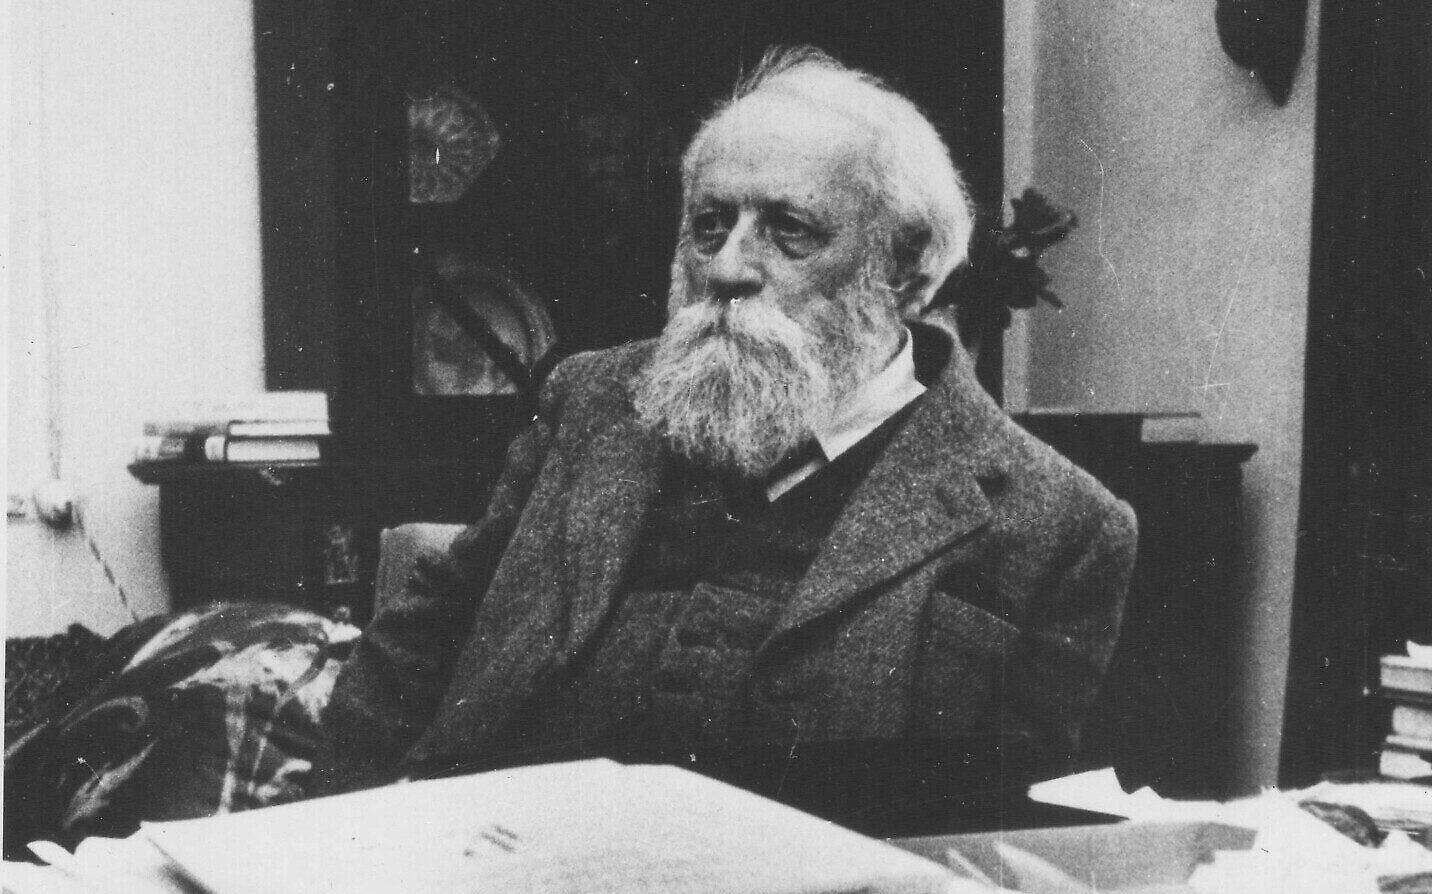 Childhood trauma may have led to Martin Buber's cerebral trust in higher  power | The Times of Israel